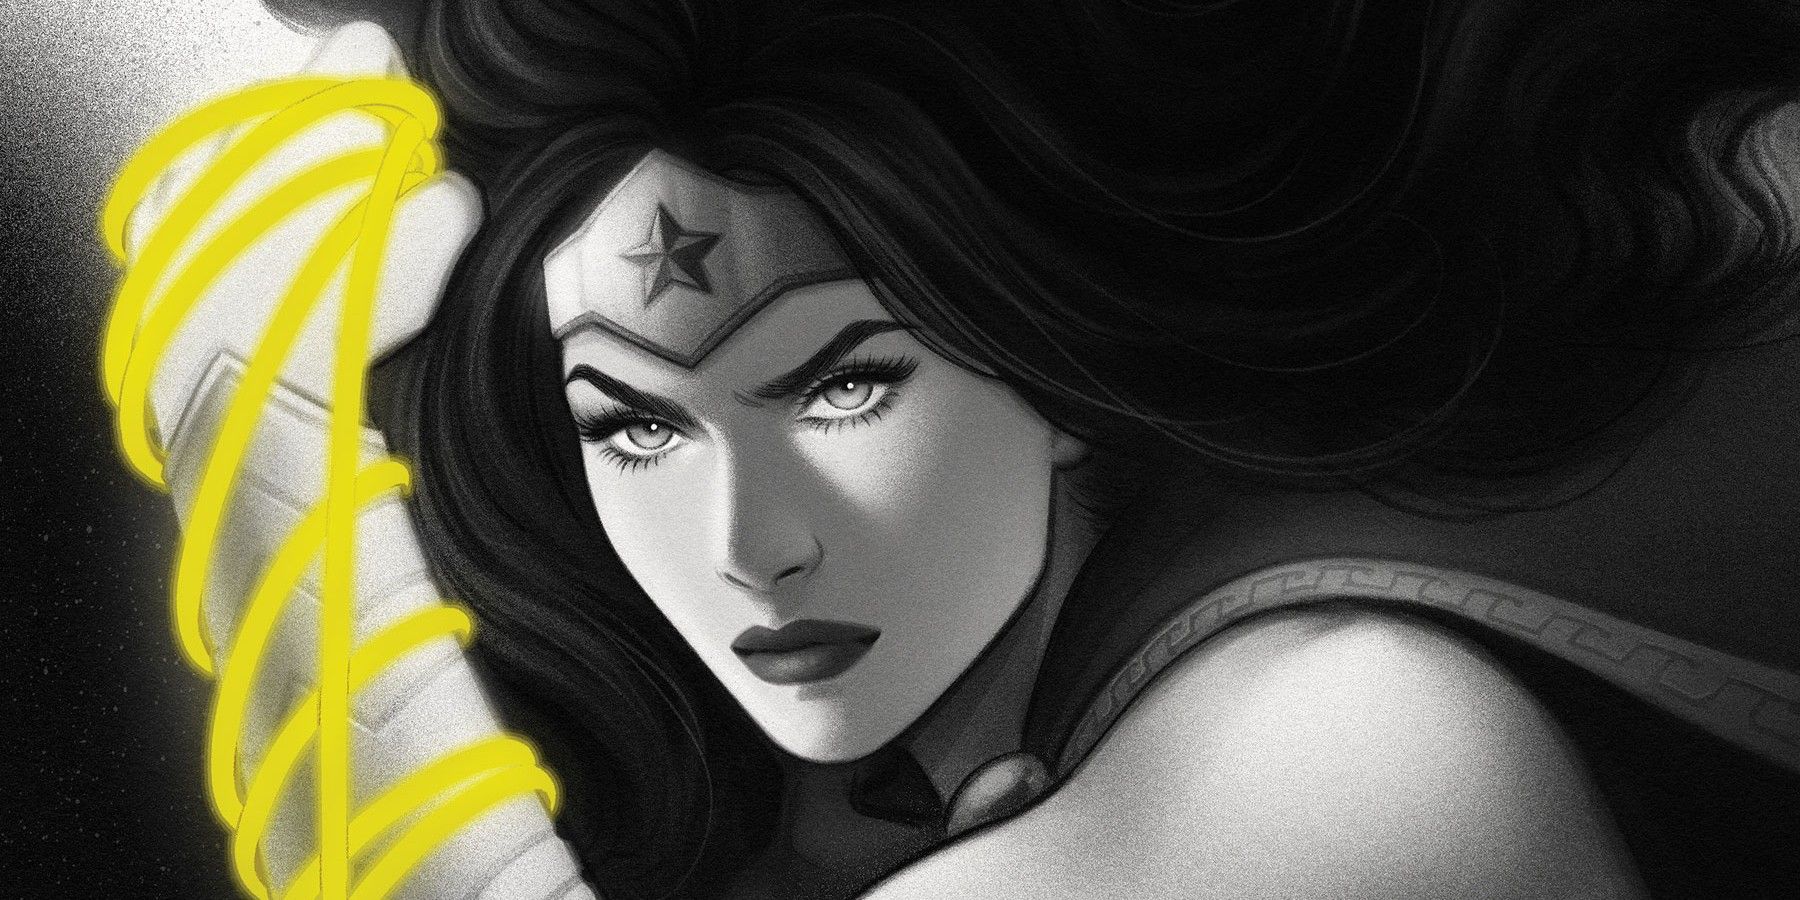 Wonder Woman with her magic lasso